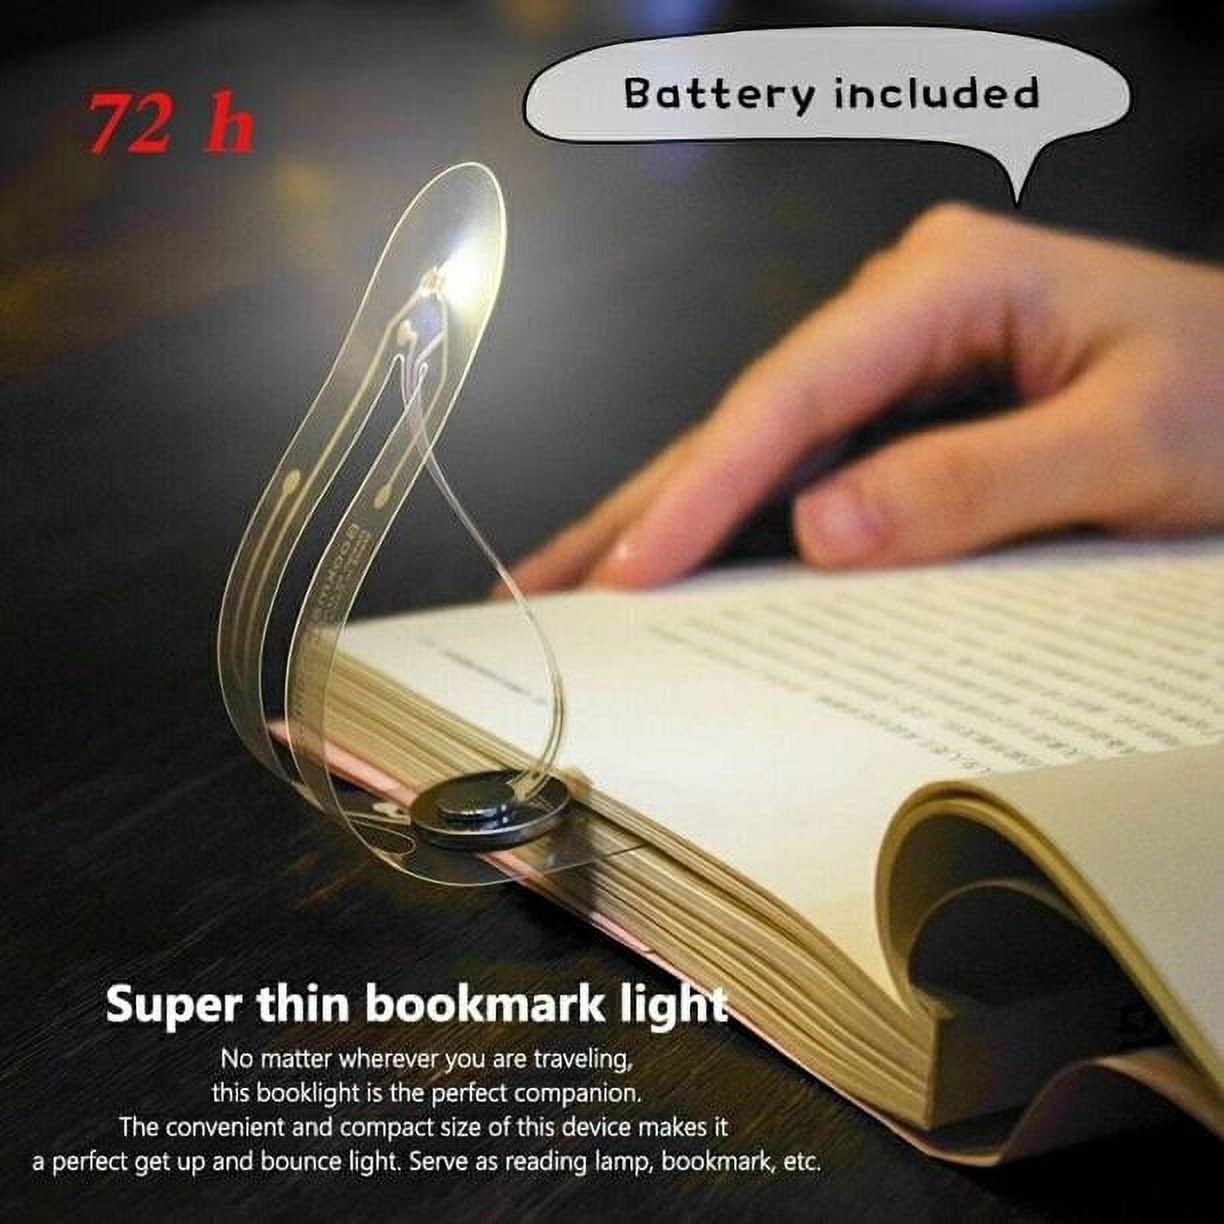 Simyoung Mini Book Light Ultra Bright Bookmark Night Lamp Flexible LED Book Reading Light Bedroom - image 1 of 5